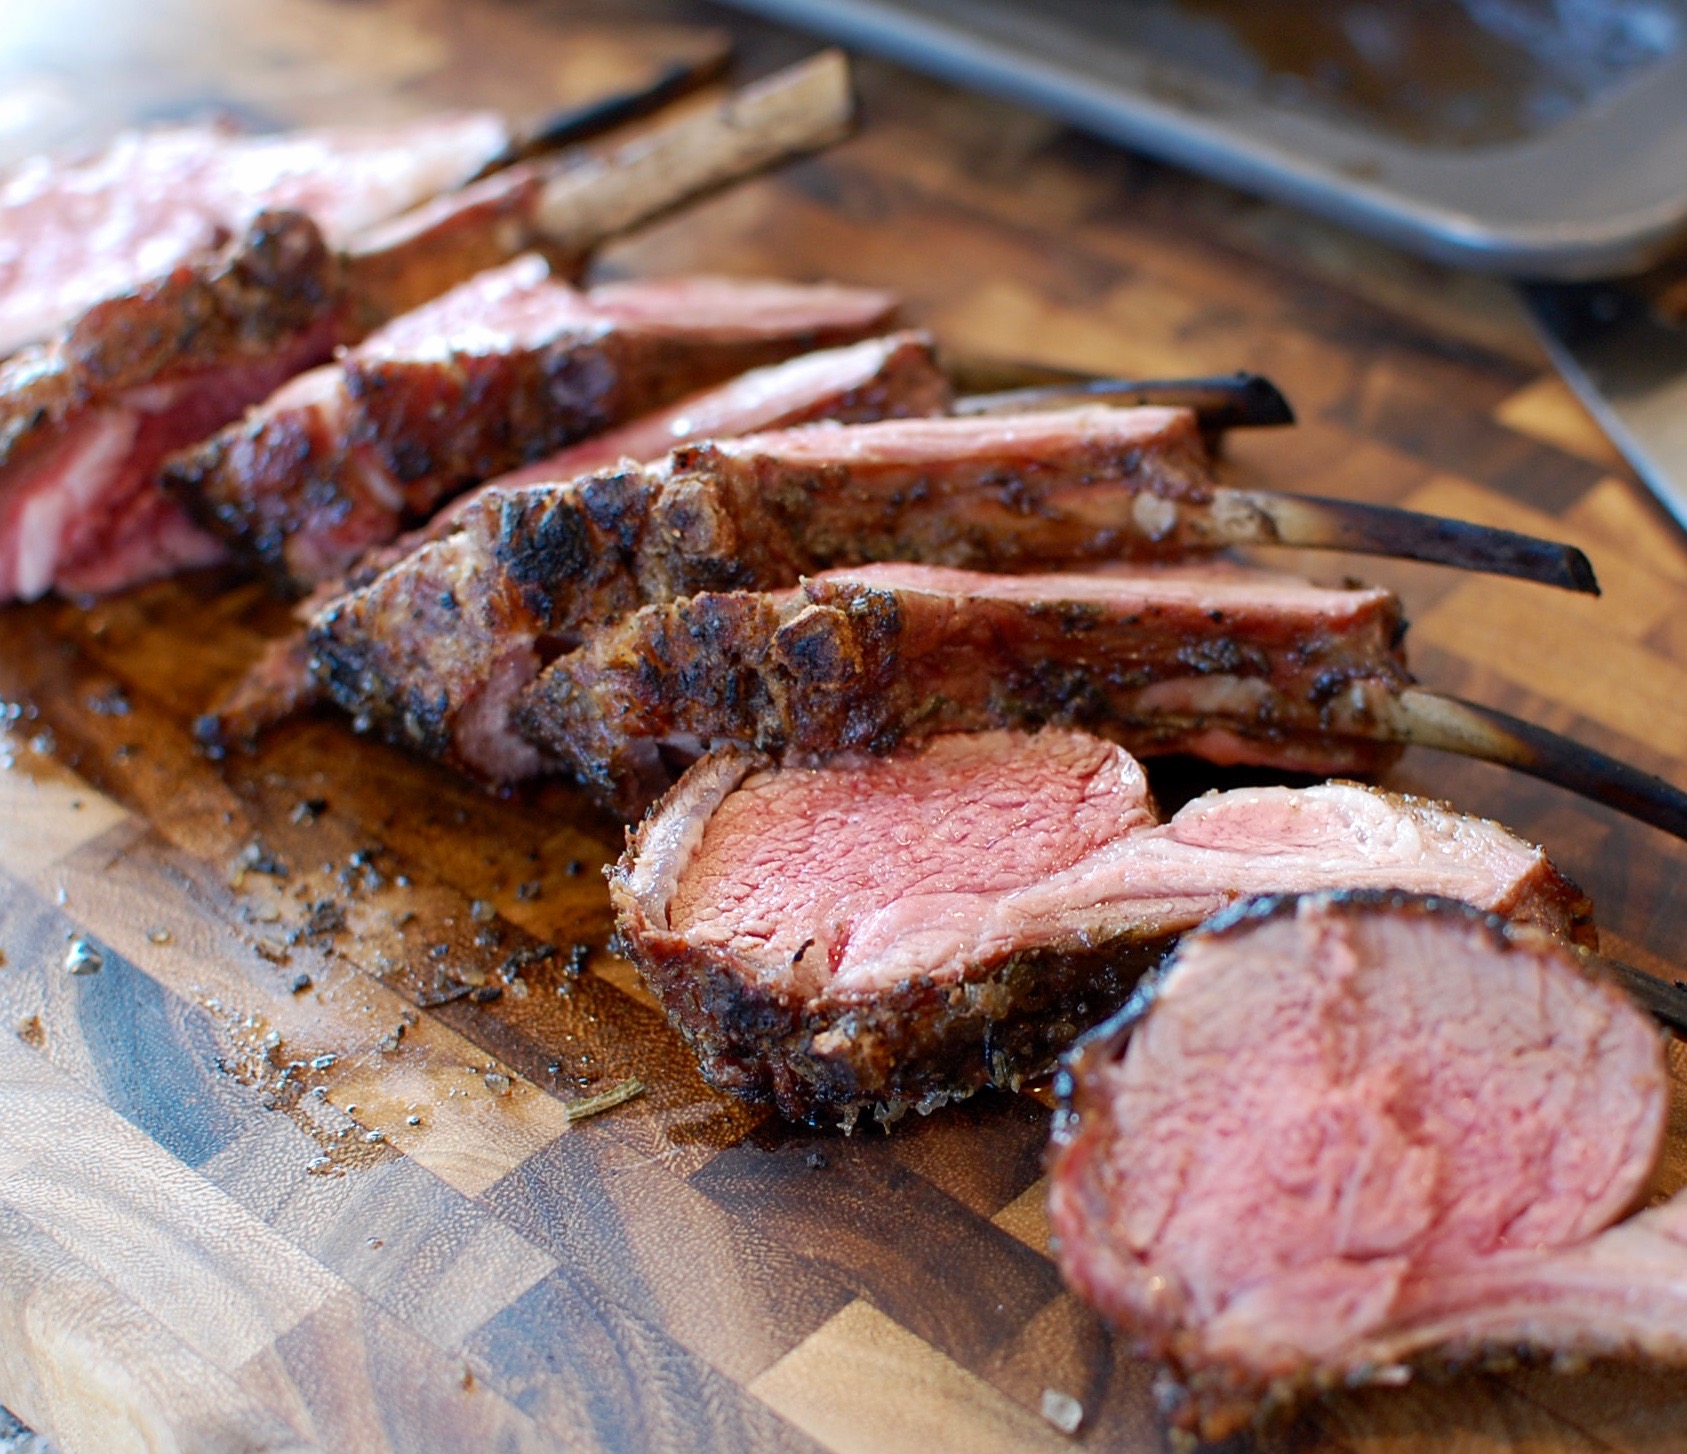 Grilled Rack Of Lamb Using A Big Green Egg Kamado Style Bbq Grill The 350 Degree Oven